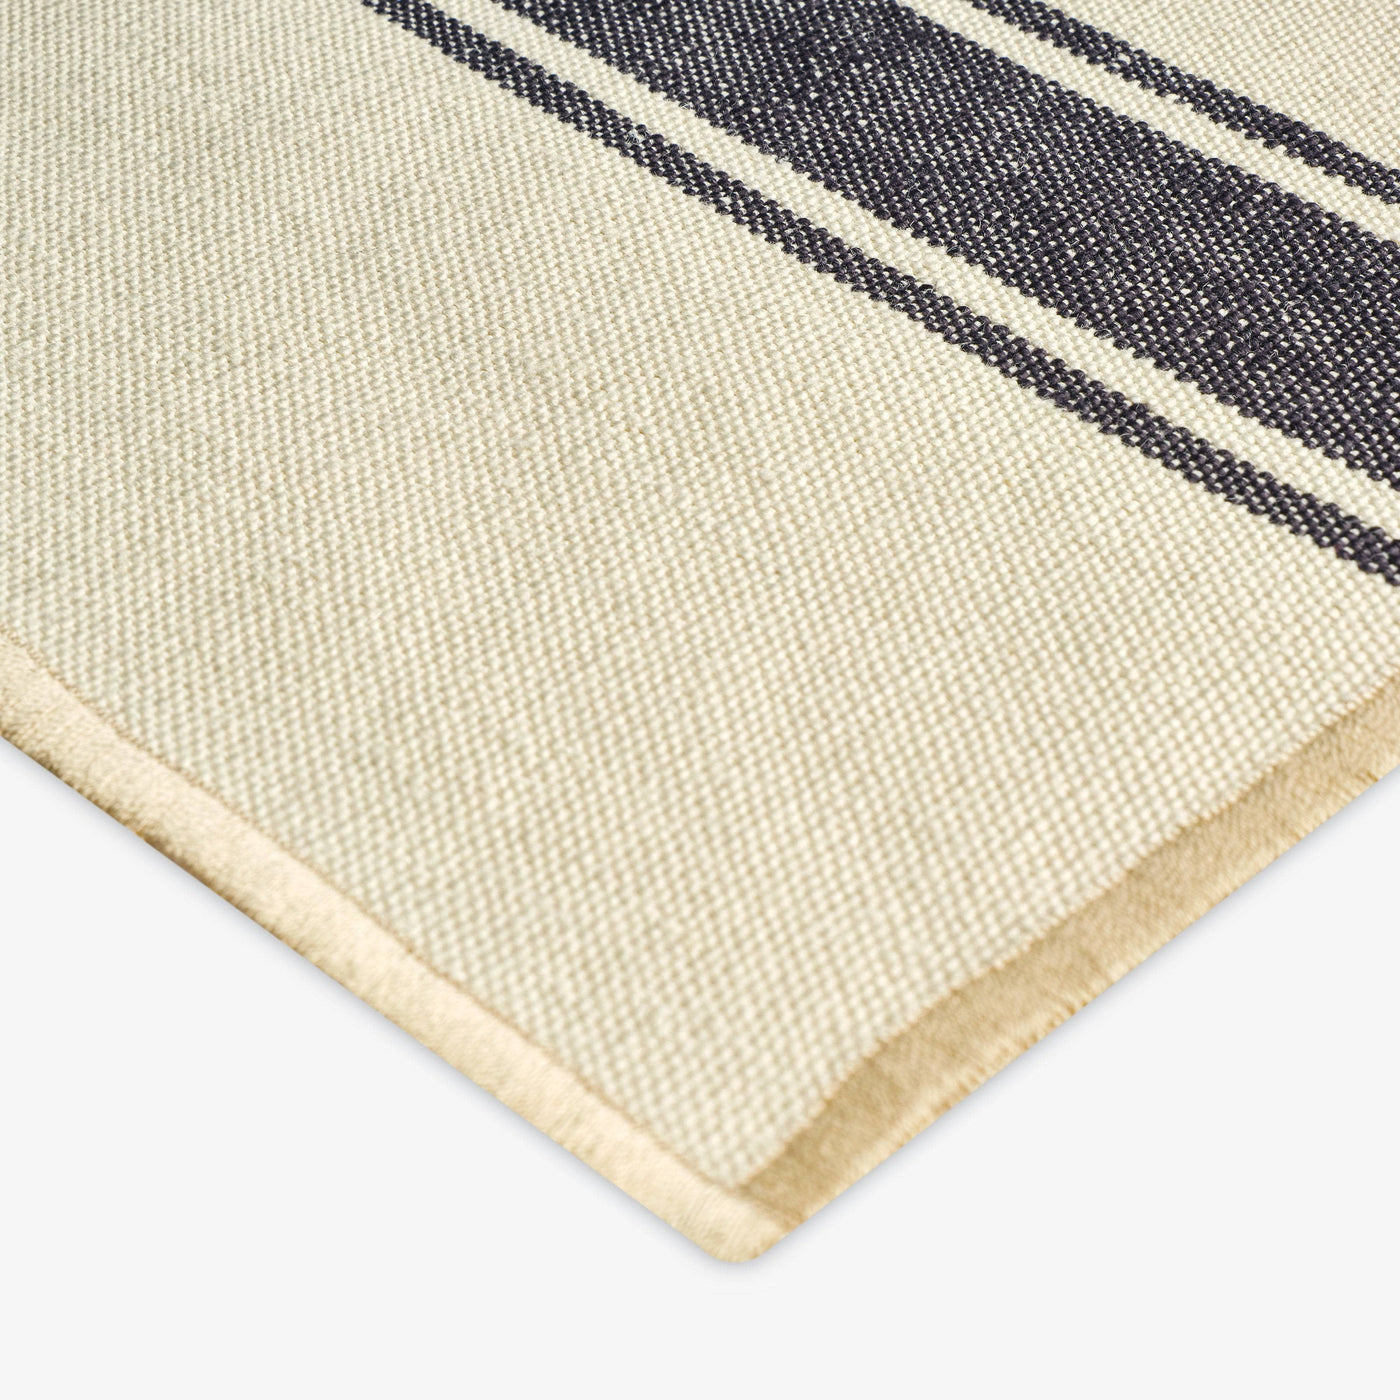 Mary Set of 2 Striped Placemats, Natural - Black, 35x46 cm 5